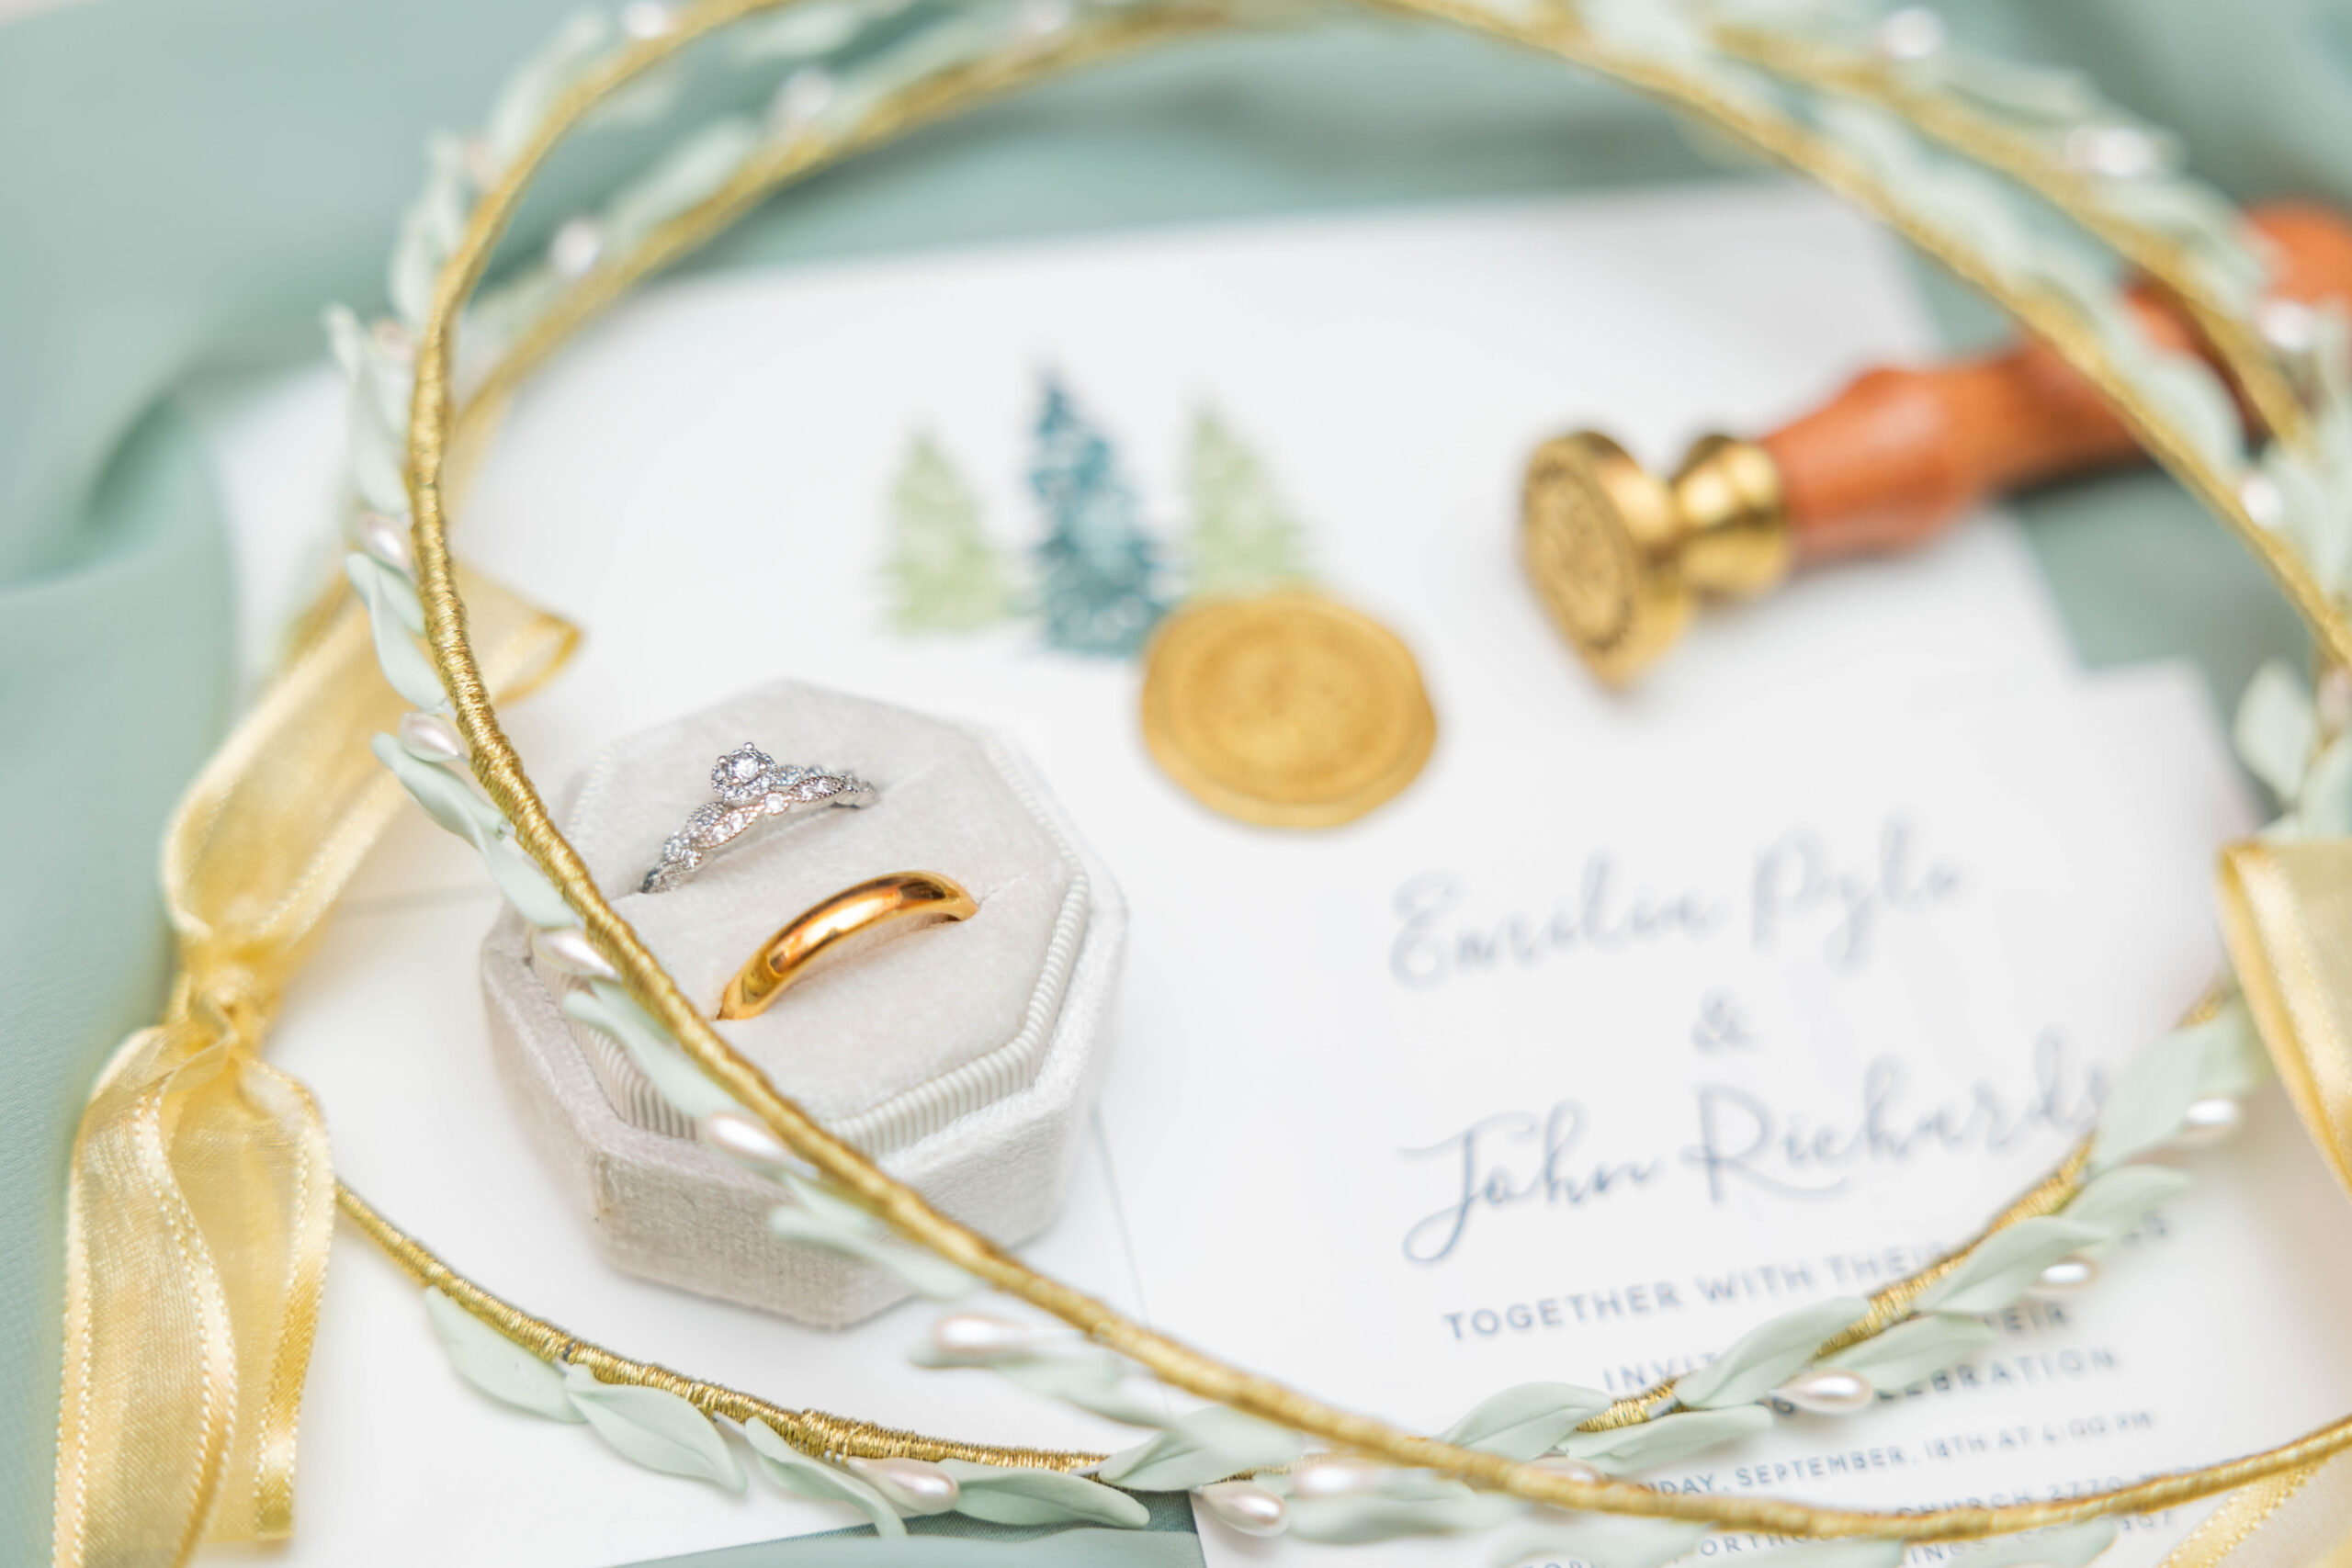 A close-up detail shot of rings, invites, and crowns at a traditional timeline wedding.